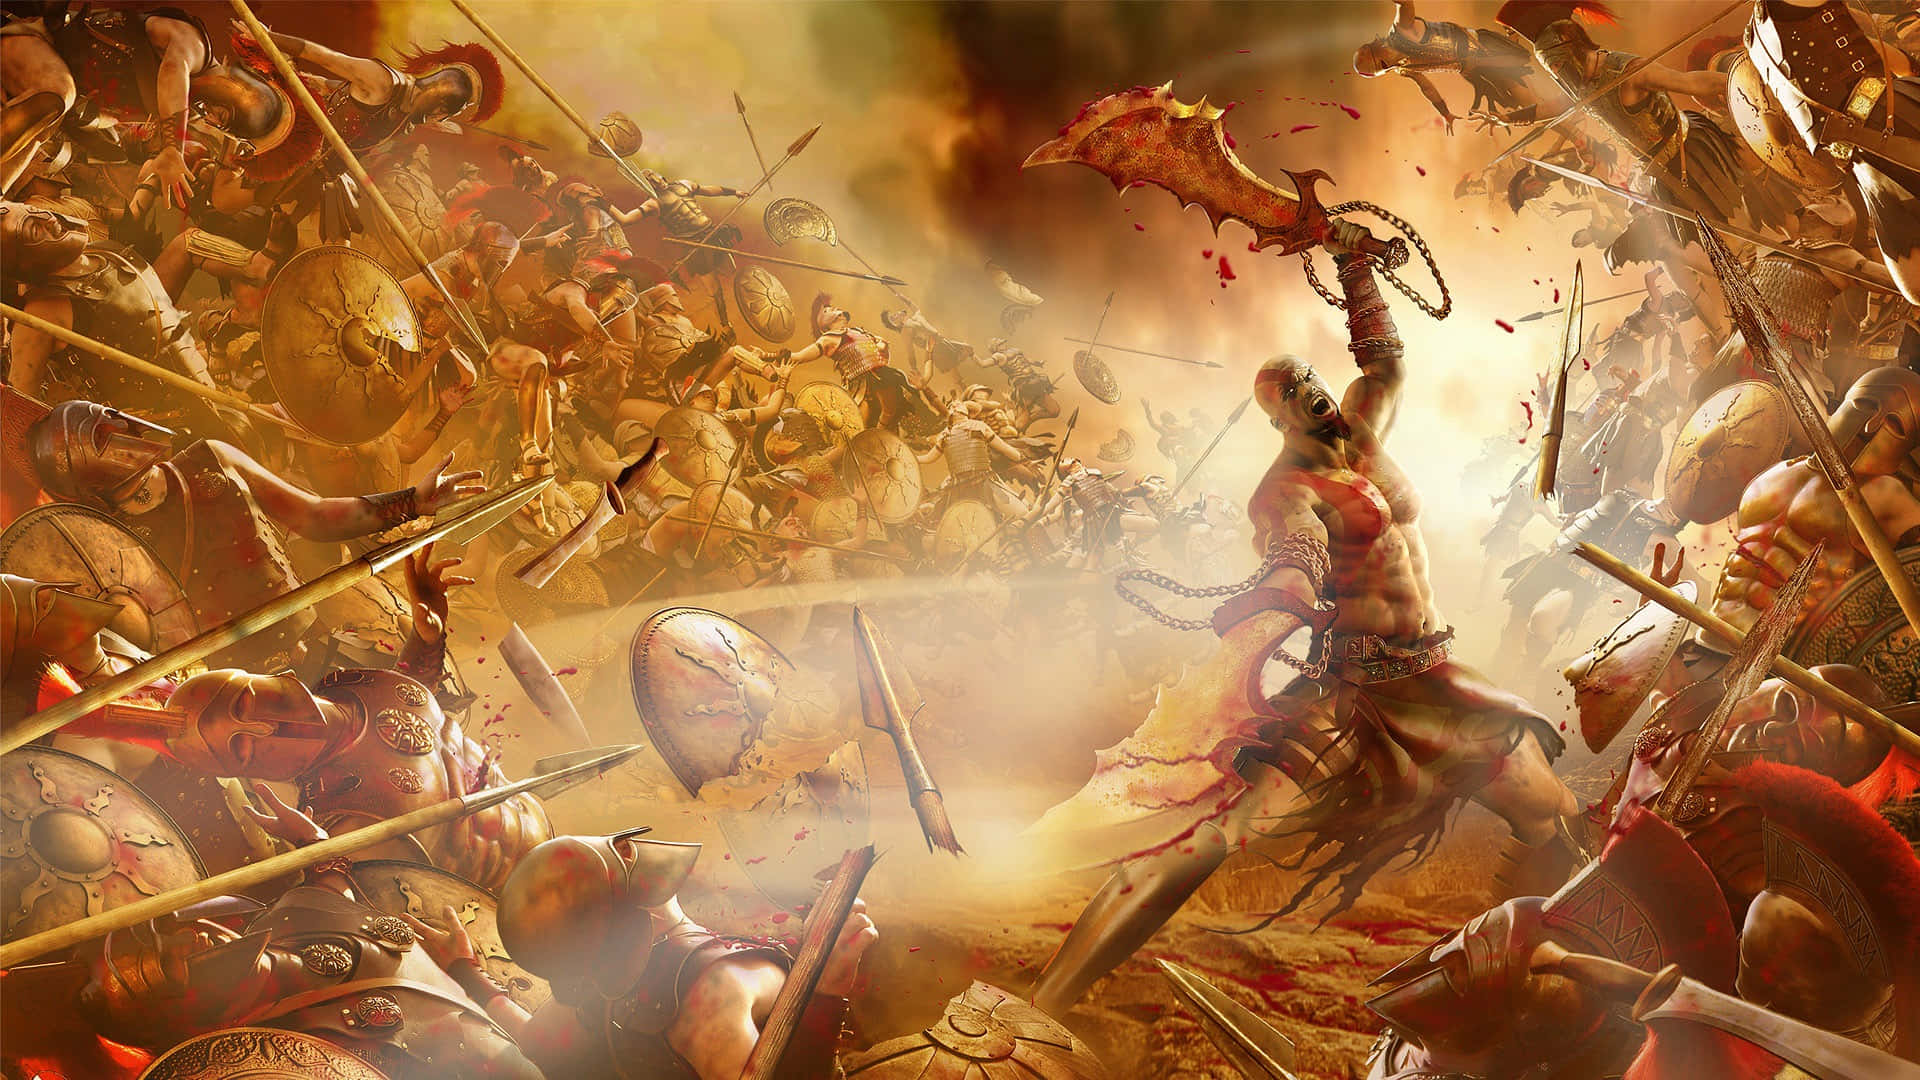 Two mighty armies facing off in an epic battle Wallpaper